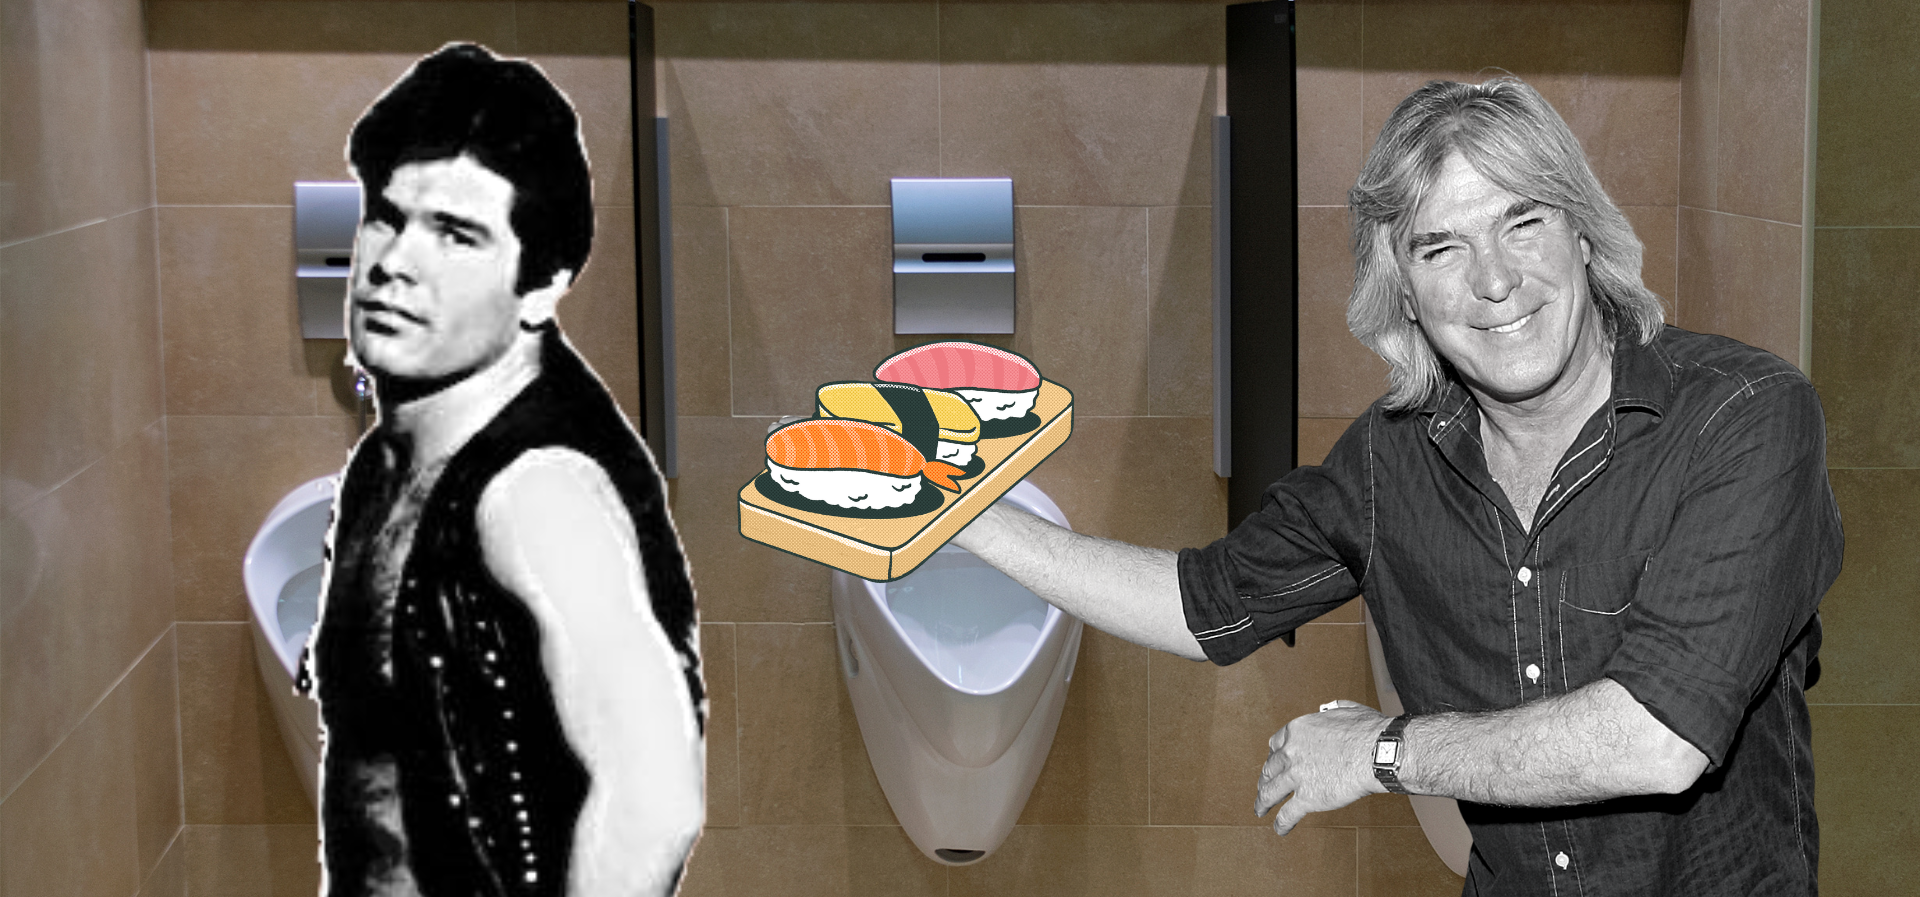 That story about AC/DC, The Angels, sushi and a urinal